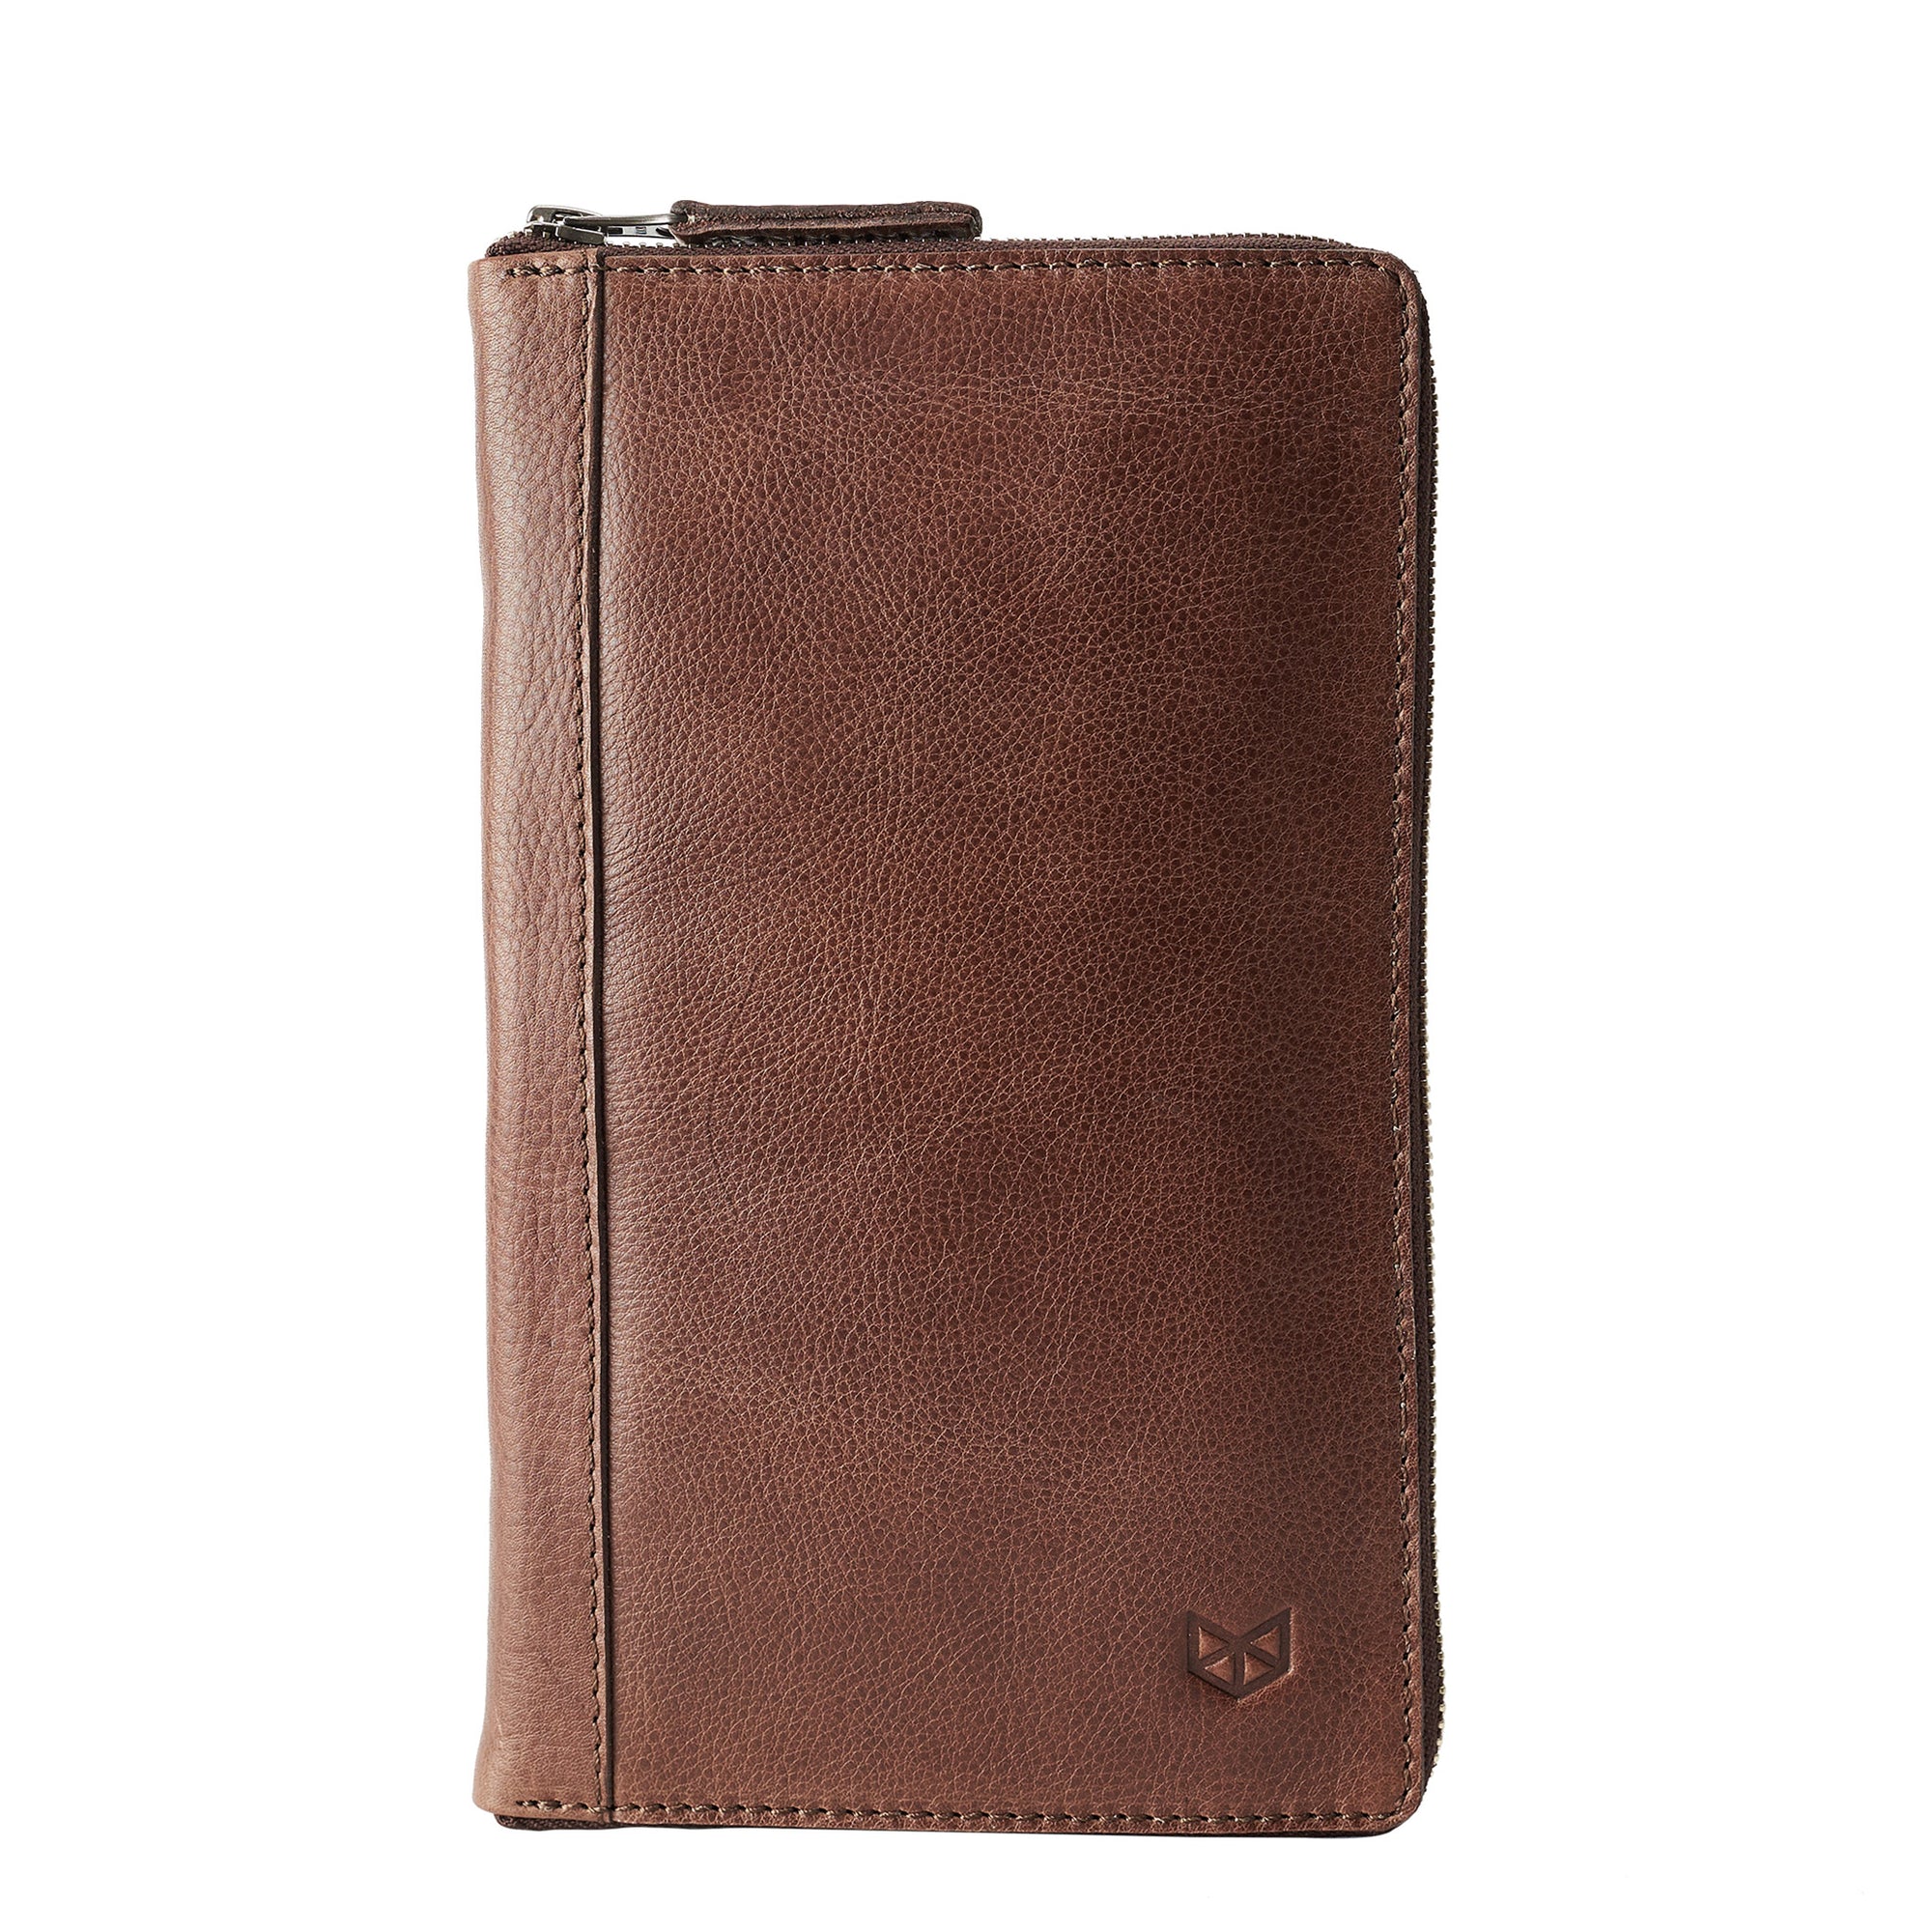 Cover. Brown Passport Holder for travelers, document organizer, travel journal by Capra Leather